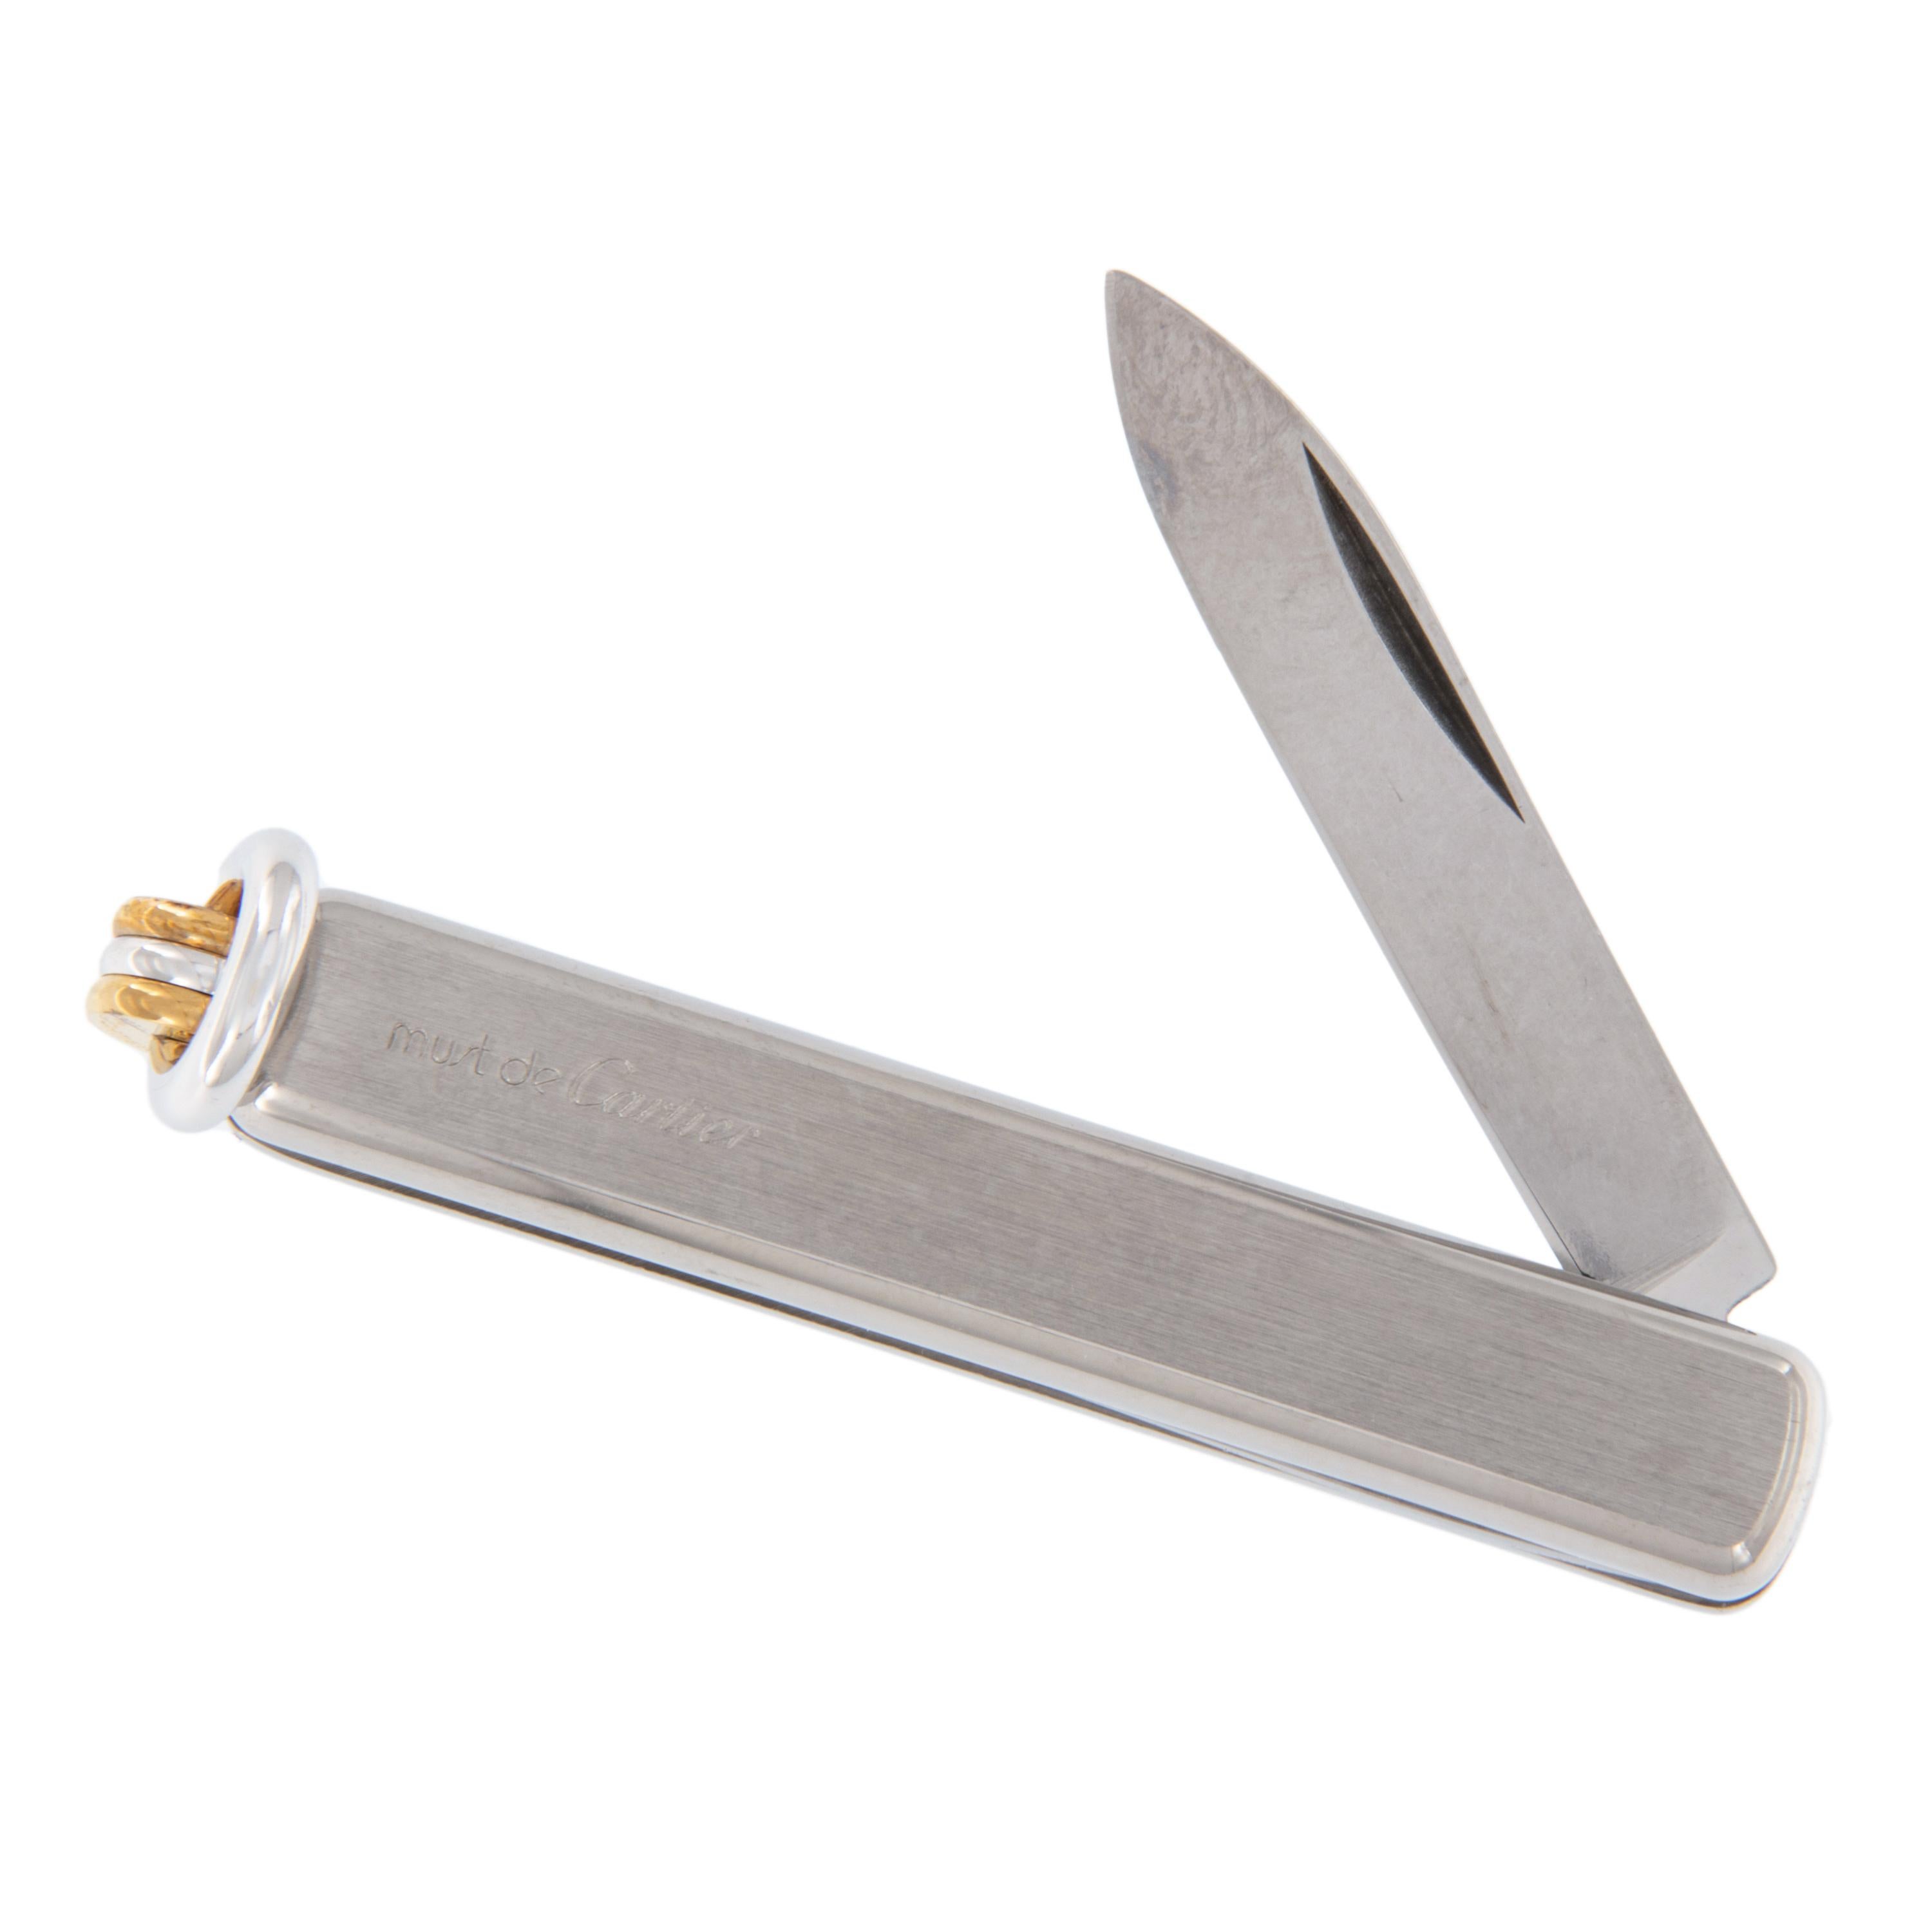 Keep your pocket equipped in style with this brand new, never used 1989 must de Cartier pocket knife with original box! Fully functional with engraving & serial number. Stainless steel and 18k gold trim. Complementary signature wrapping.